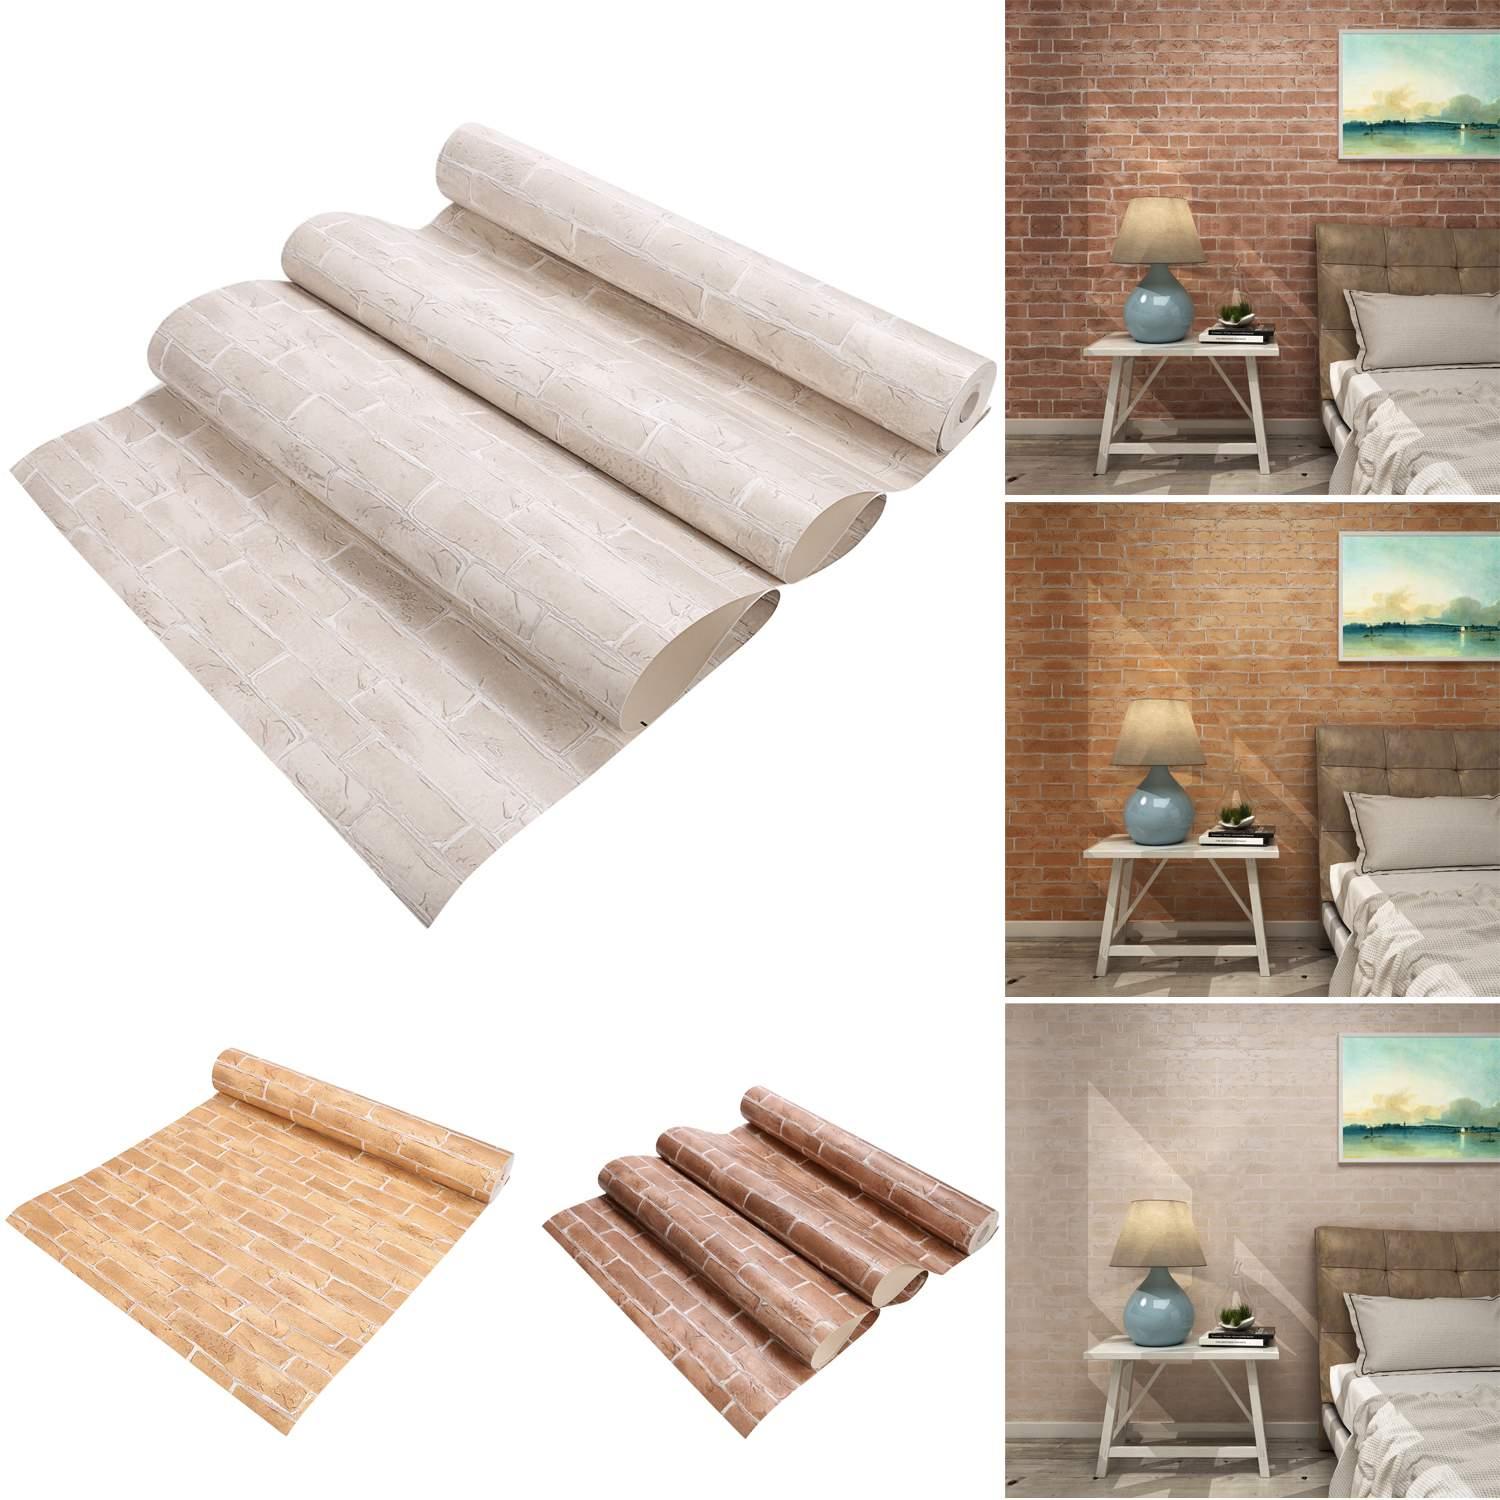 Details About 10m 3d Wallpaper Bedroom Mural Roll Modern Stone Brick Wall Background 3 Types